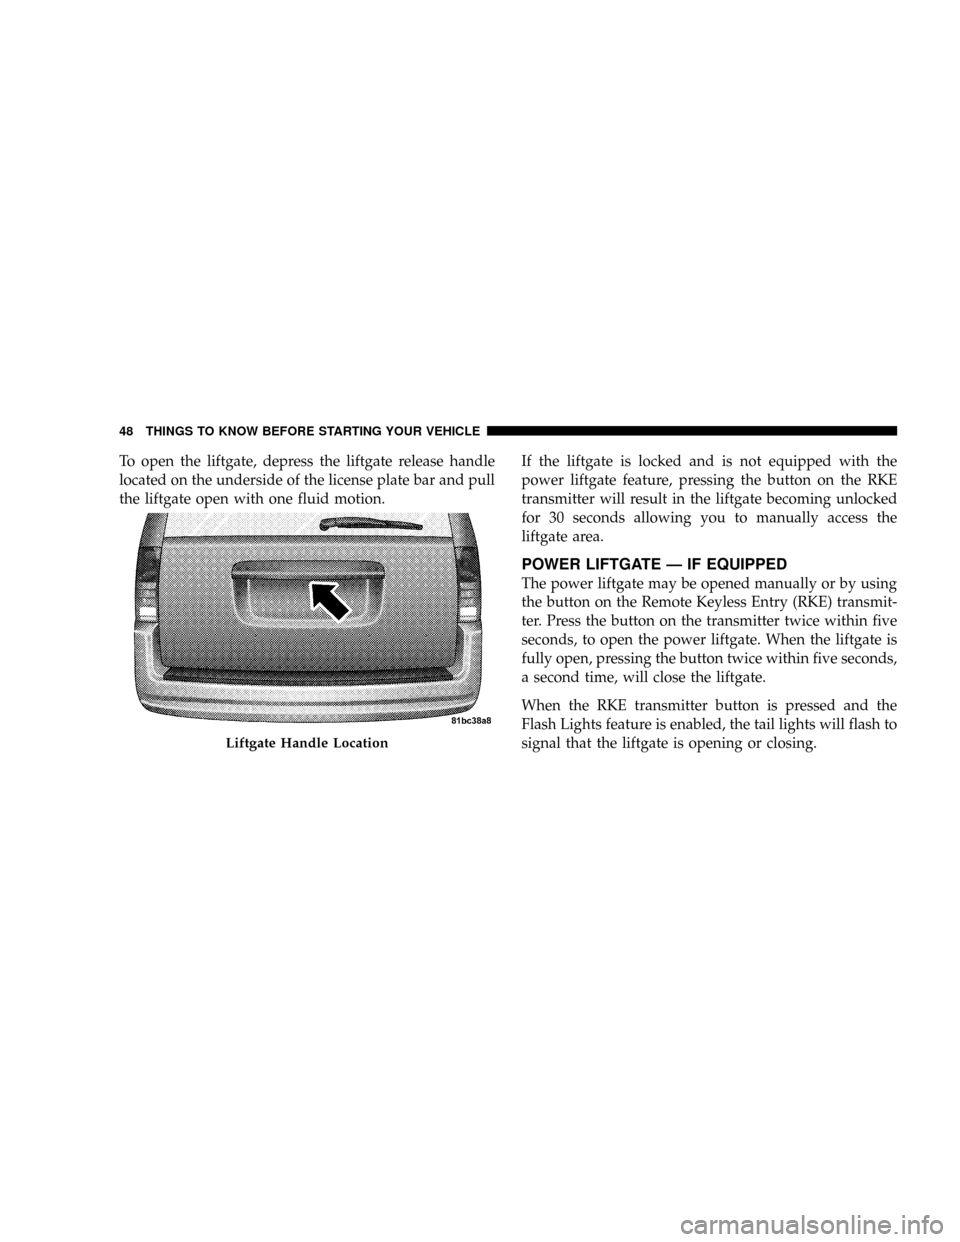 CHRYSLER TOWN AND COUNTRY 2008 5.G Service Manual To open the liftgate, depress the liftgate release handle
located on the underside of the license plate bar and pull
the liftgate open with one fluid motion.If the liftgate is locked and is not equipp